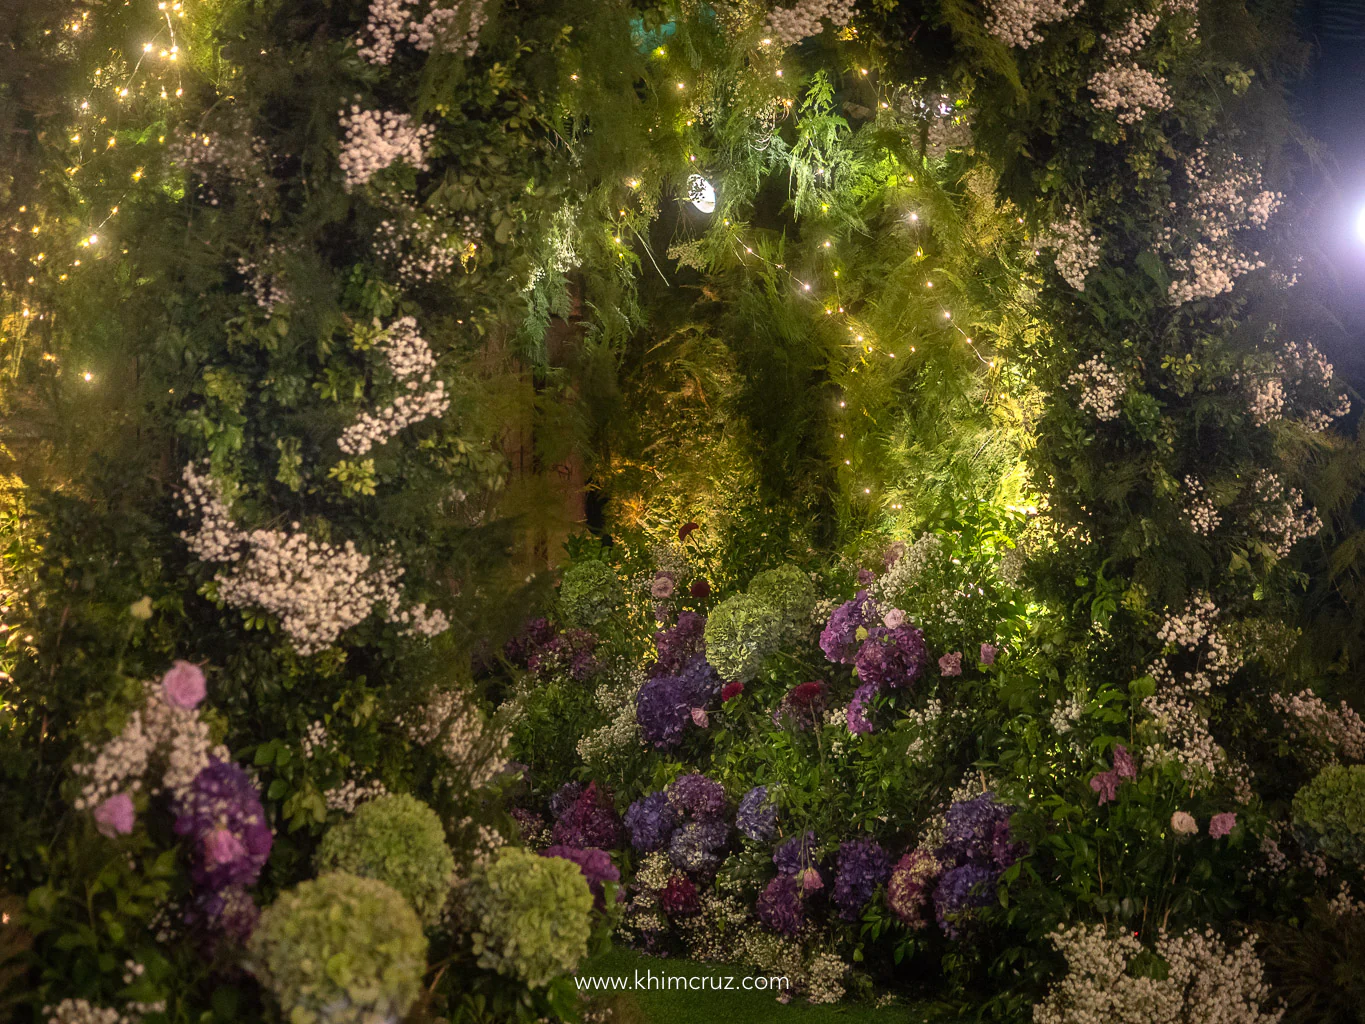 entrance tunnel passage way floral details to the enchanting forest of dreams debut